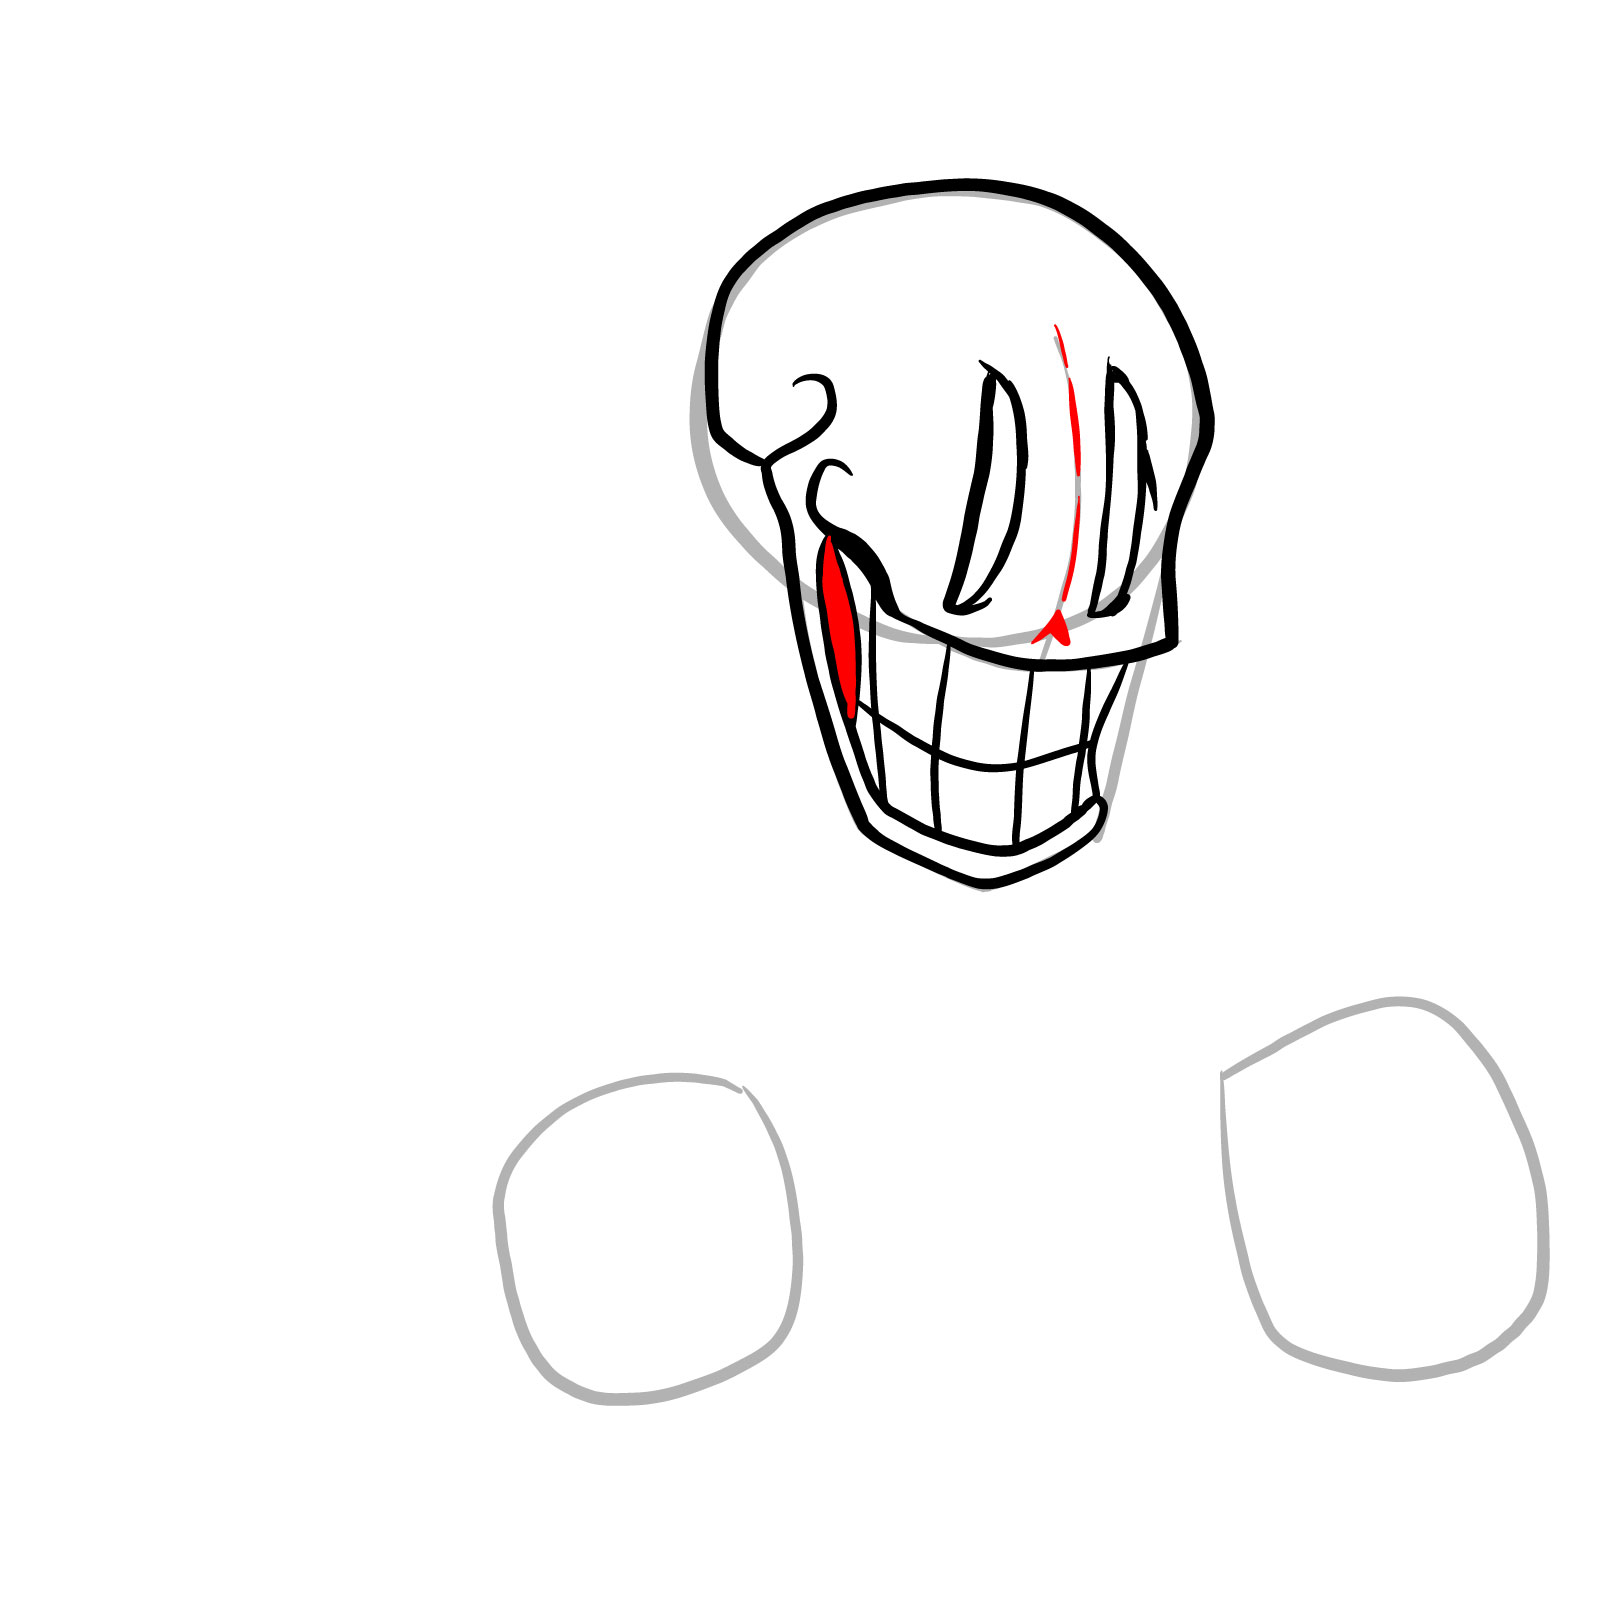 How to draw Phantom!Papyrus from FNF - step 11